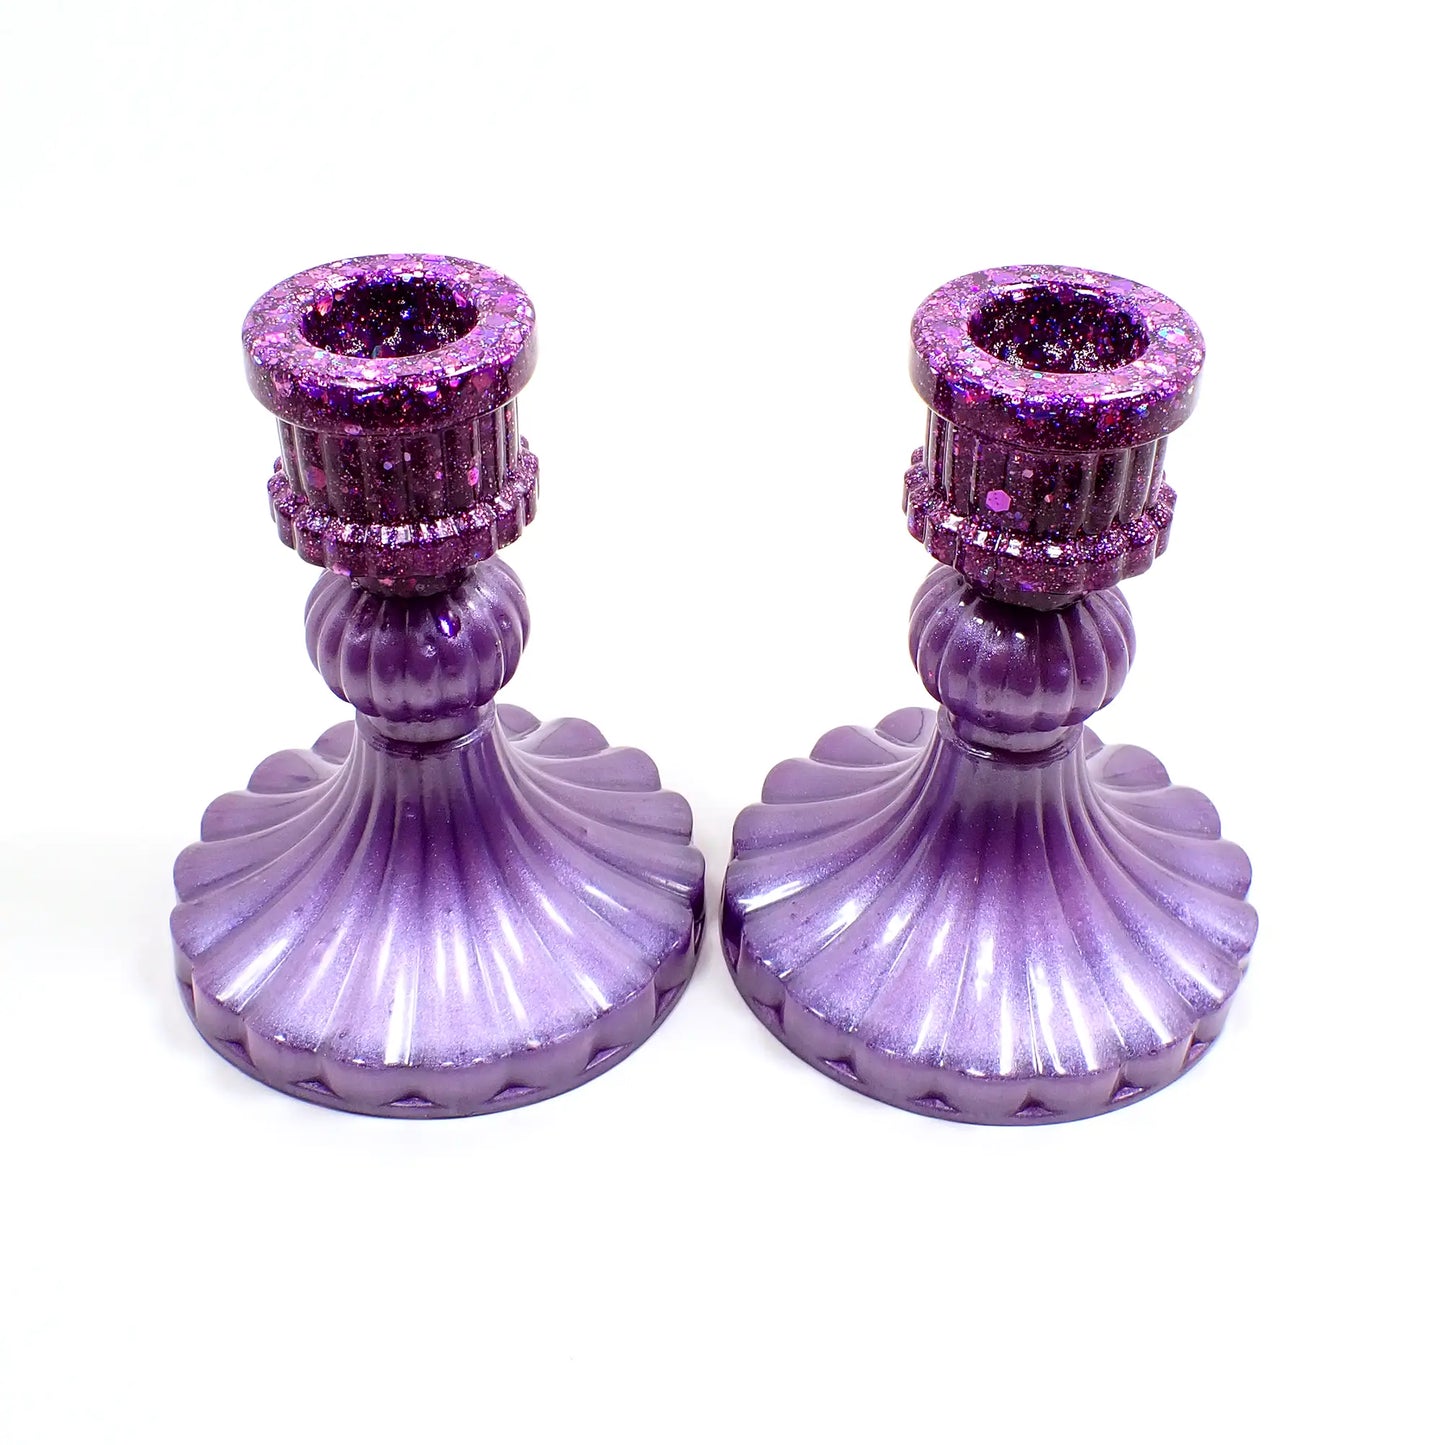 Set of Two Vintage Style Handmade Light Pearly Purple Resin Candlestick Holders with Chunky Iridescent Glitter